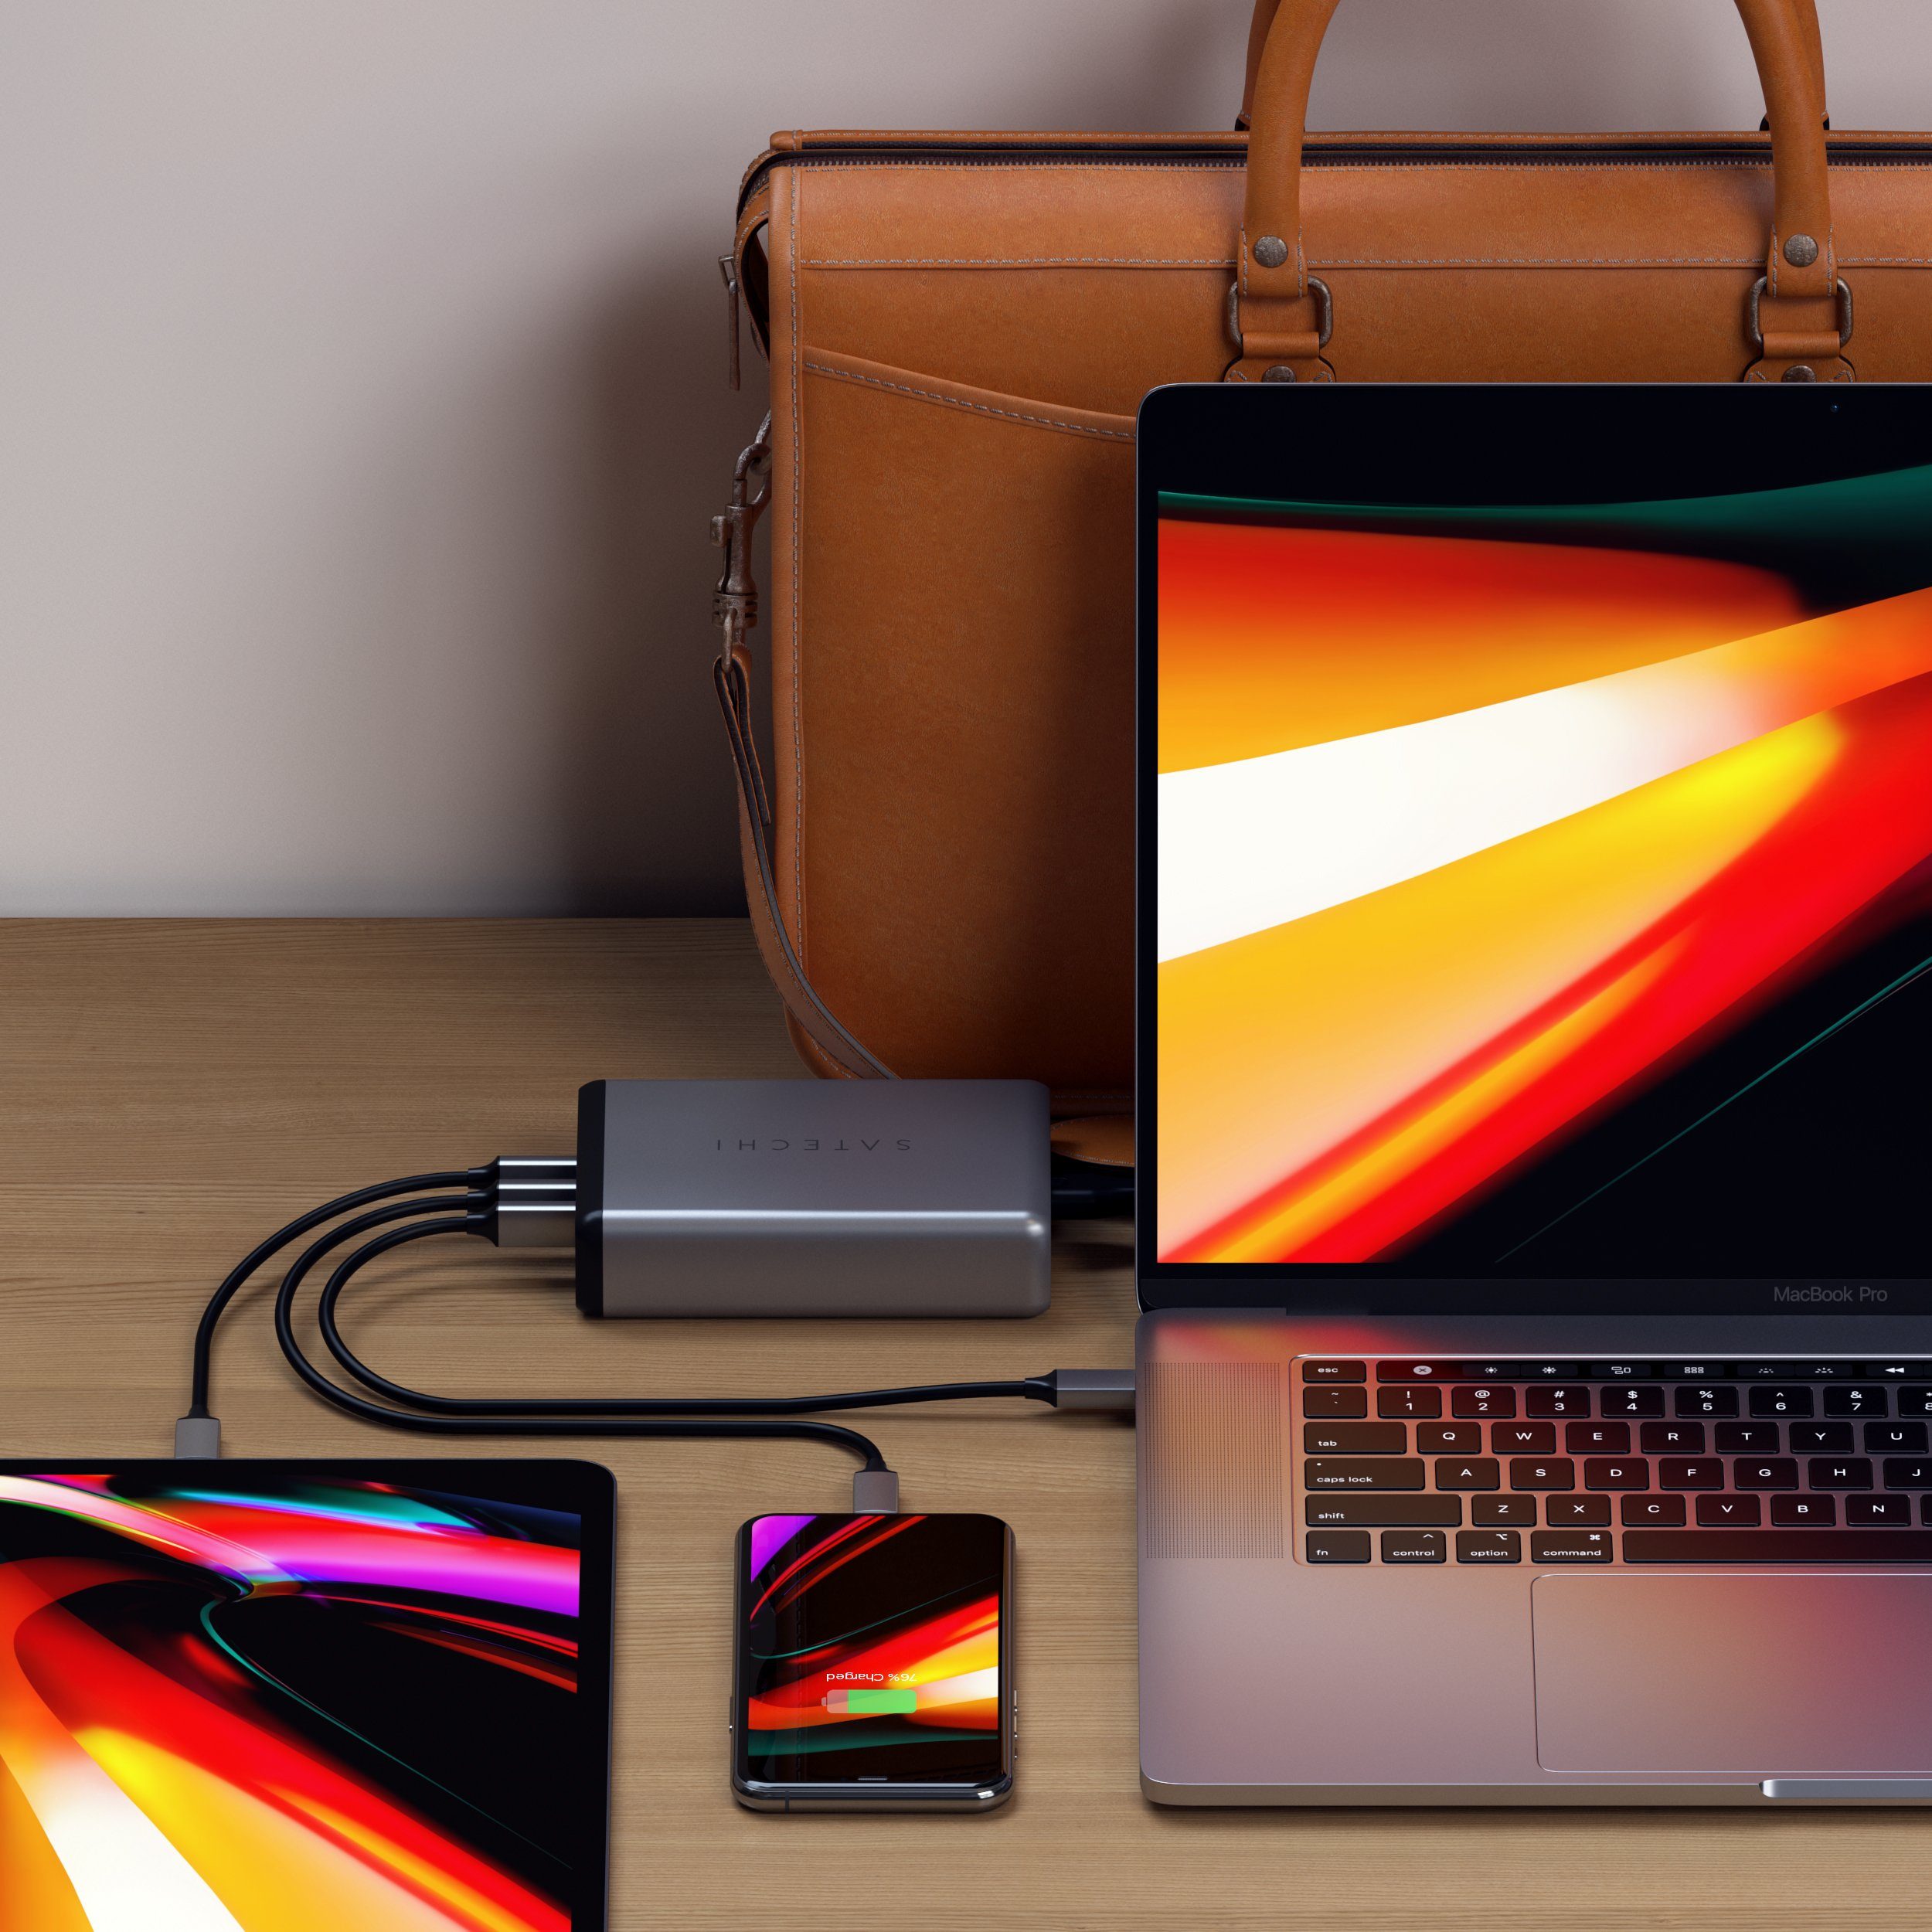 Satechi 108w pro usb-c pd desktop wall charger on a desk simultaneously charging a MacBook Pro, an iPhone, and a iPad Pro in front of a work bag